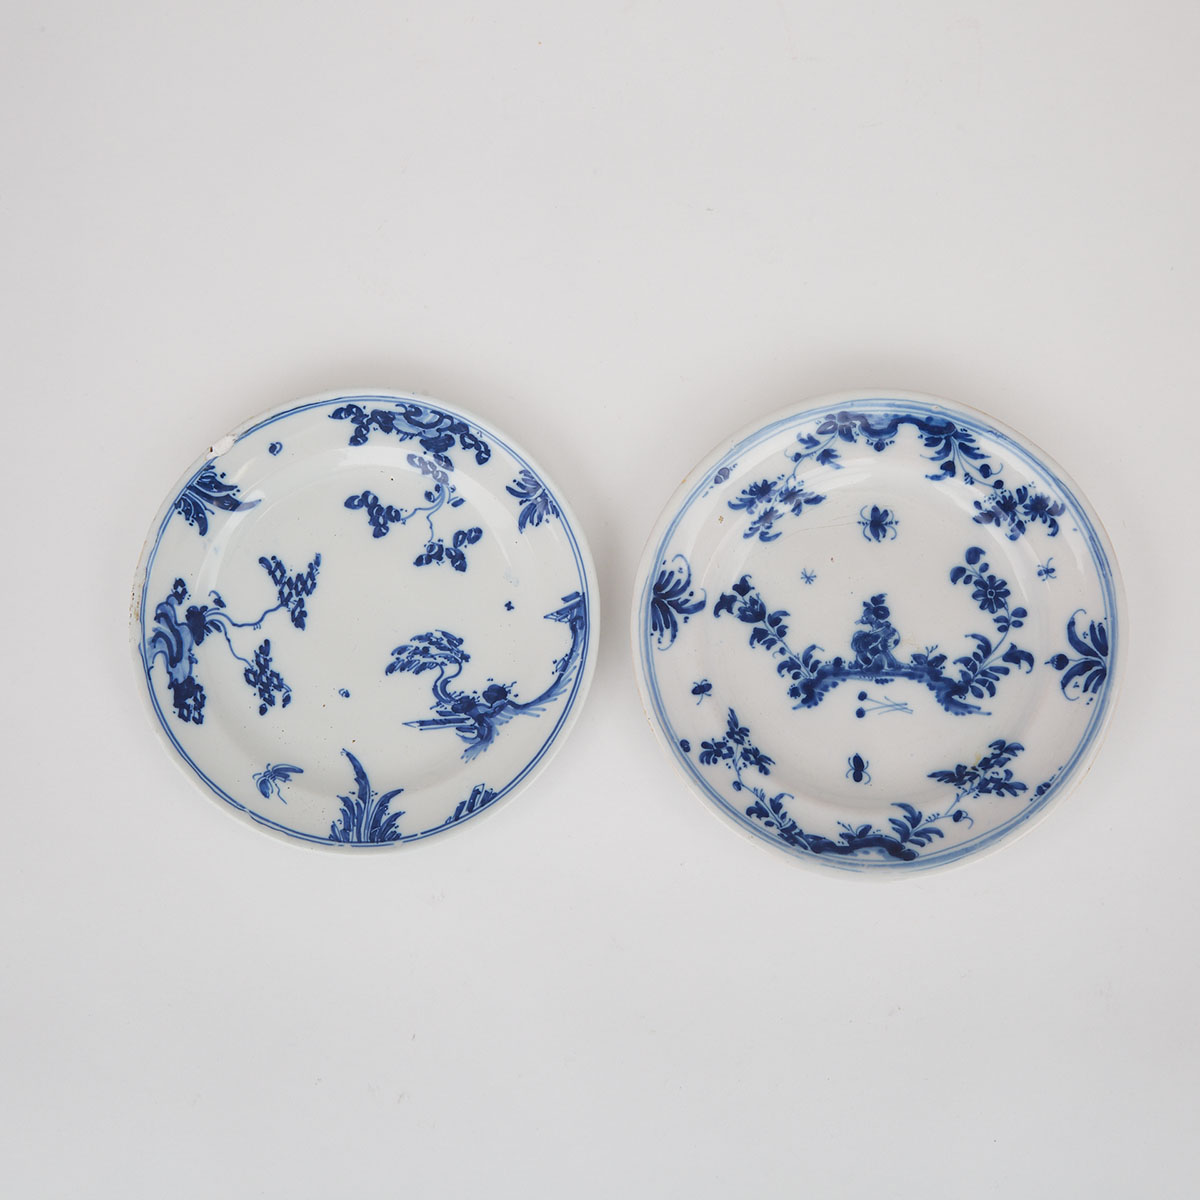 Two Marseille Blue Painted Chinoiserie Faience Plates, 18th century